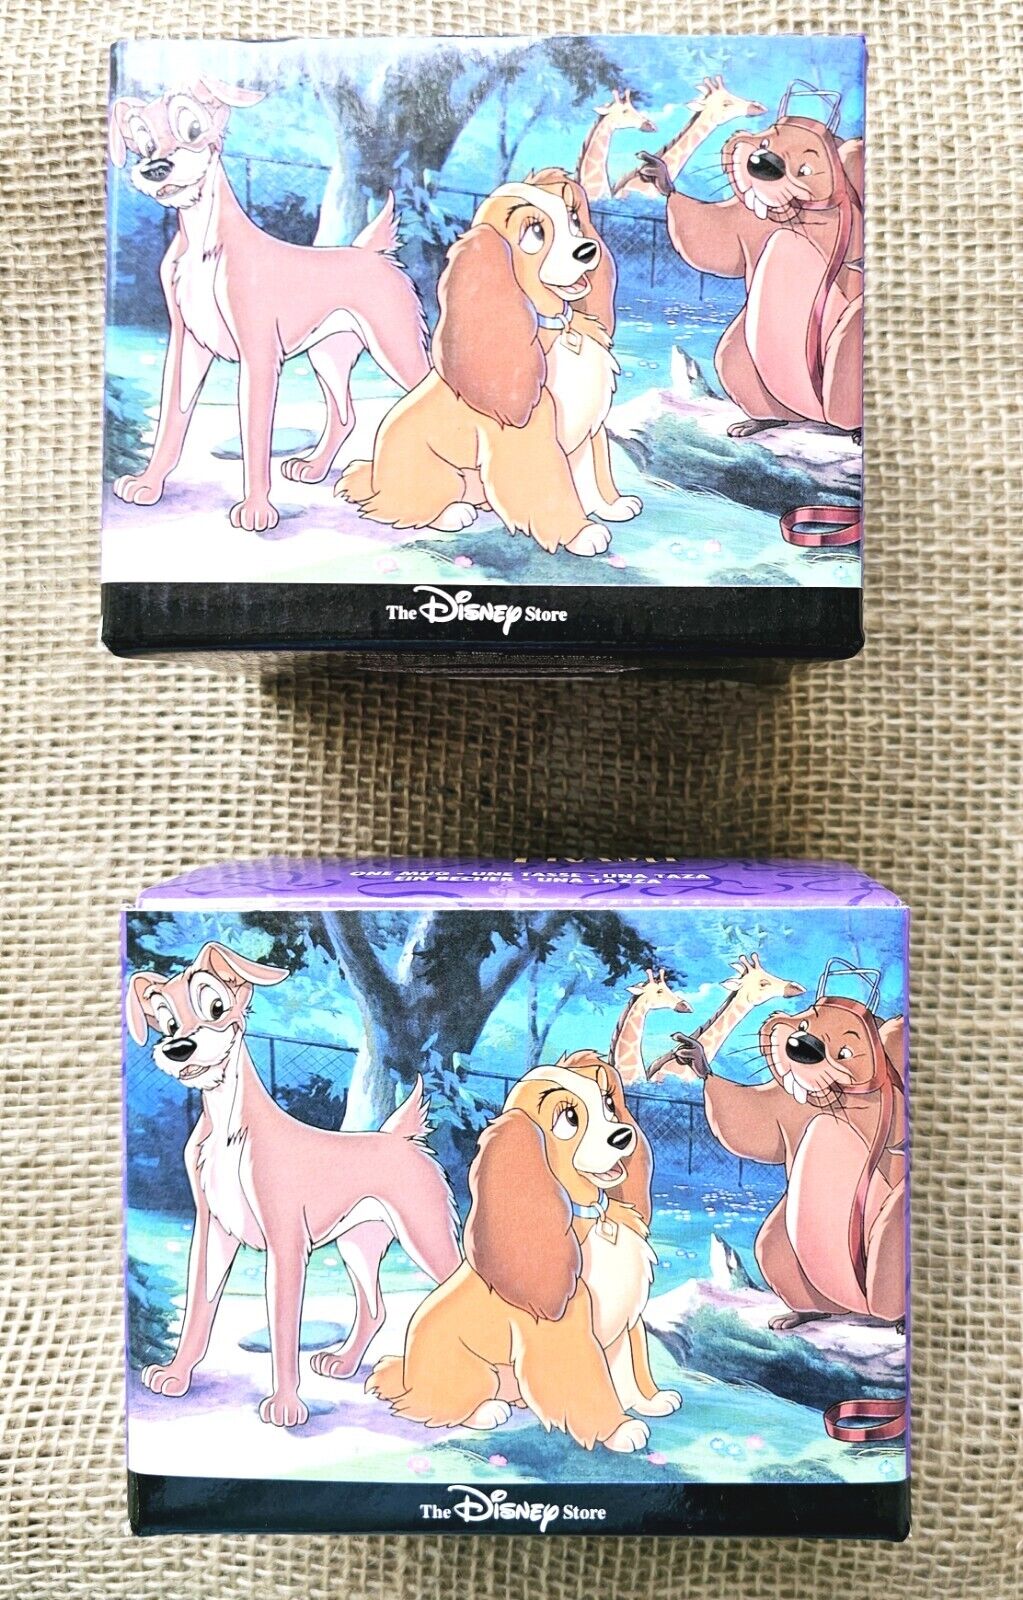 2 New Vintage 1990s Disney Store Lady And The Tramp Coffee Mugs In Boxes